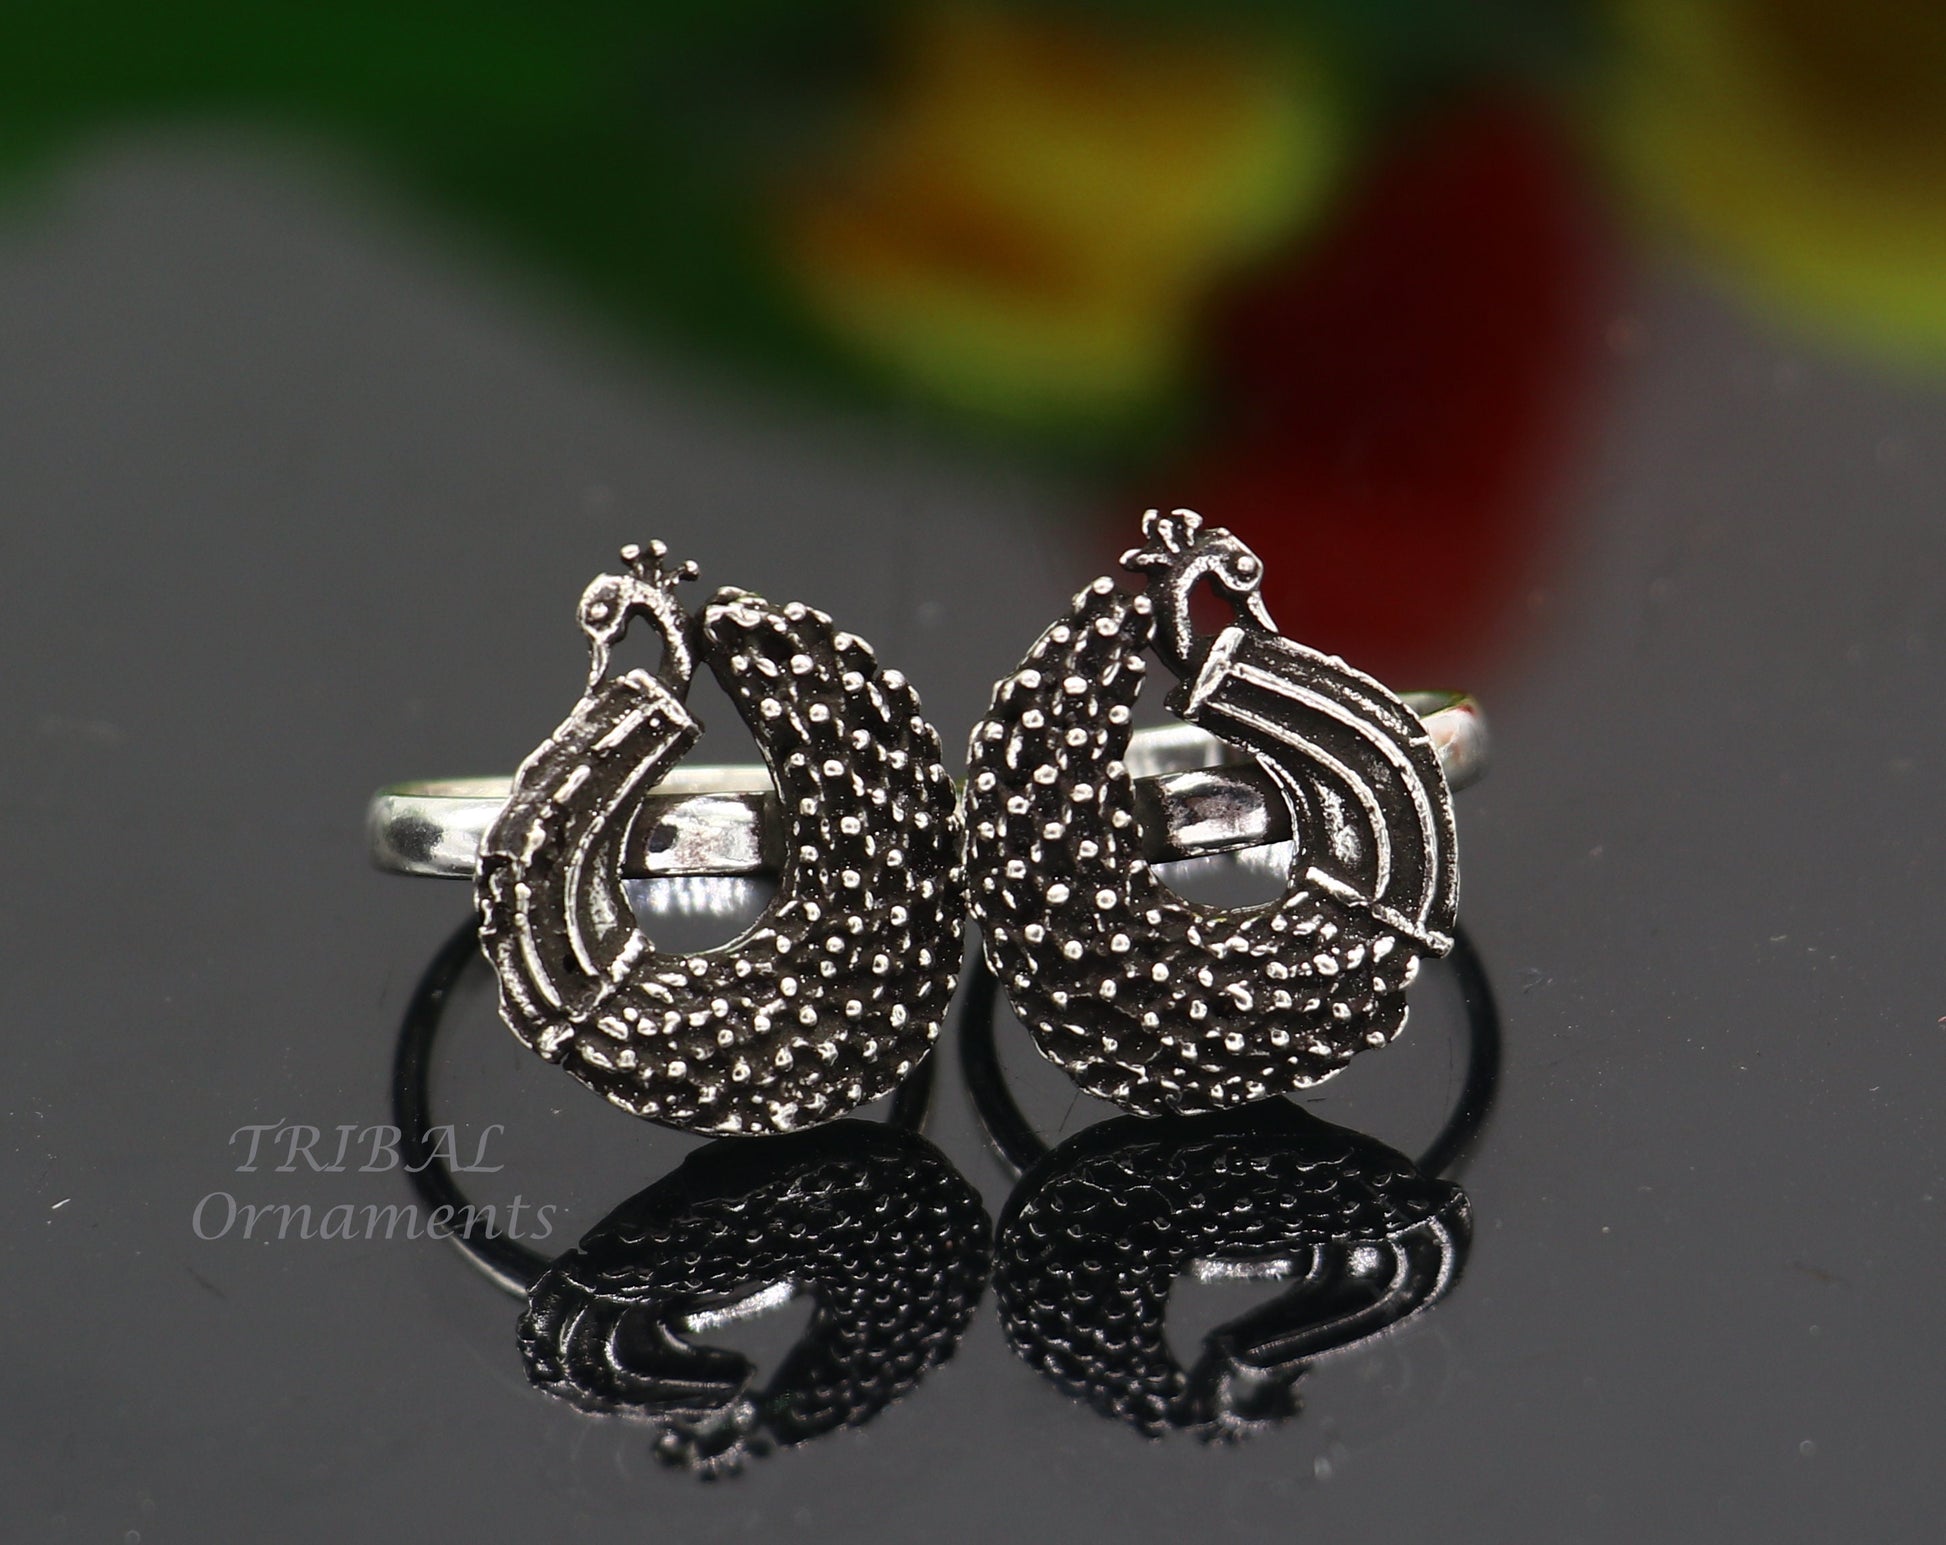 925 sterling silver elegant peacock design handmade toe ring, toe band stylish women's brides jewelry, india traditional jewelry ytr46 - TRIBAL ORNAMENTS